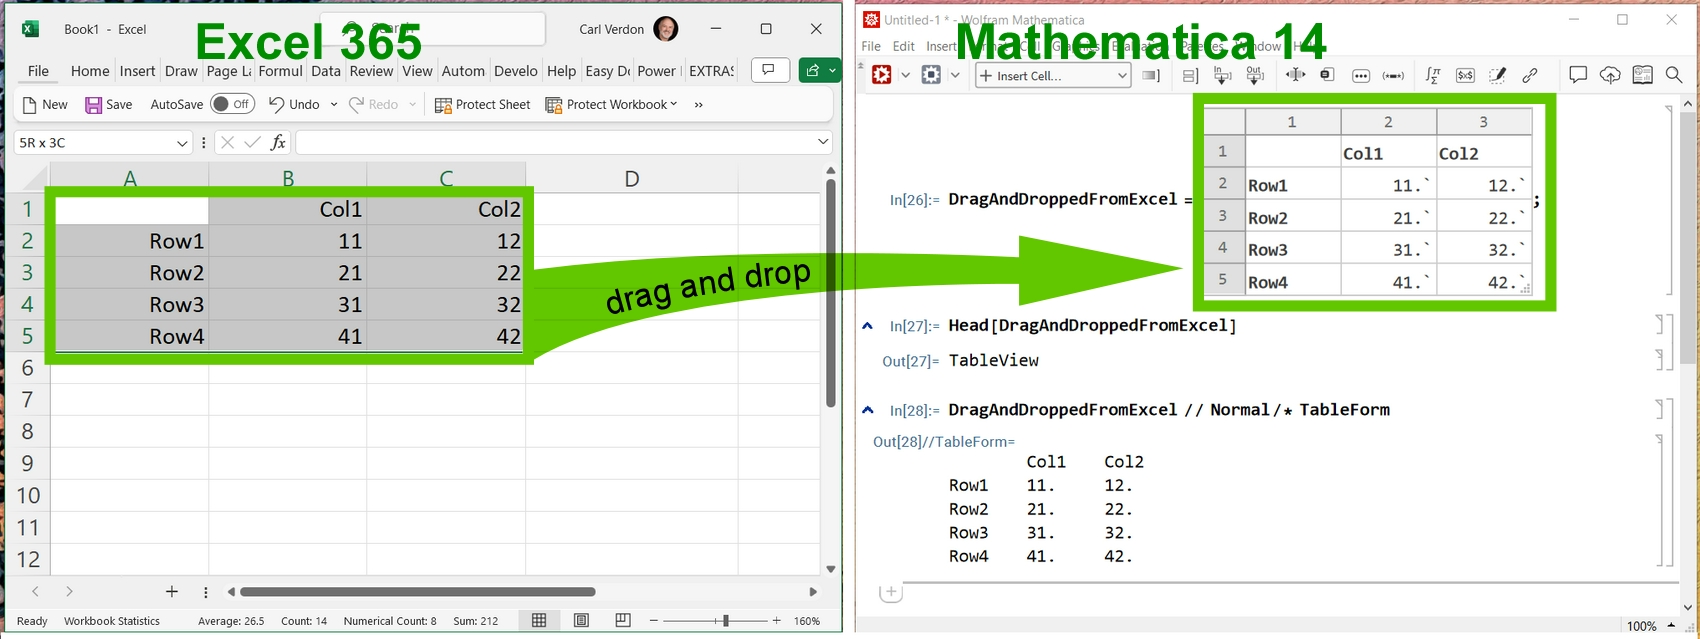 image illustrating drag and drop of data from Excel to Mathematica